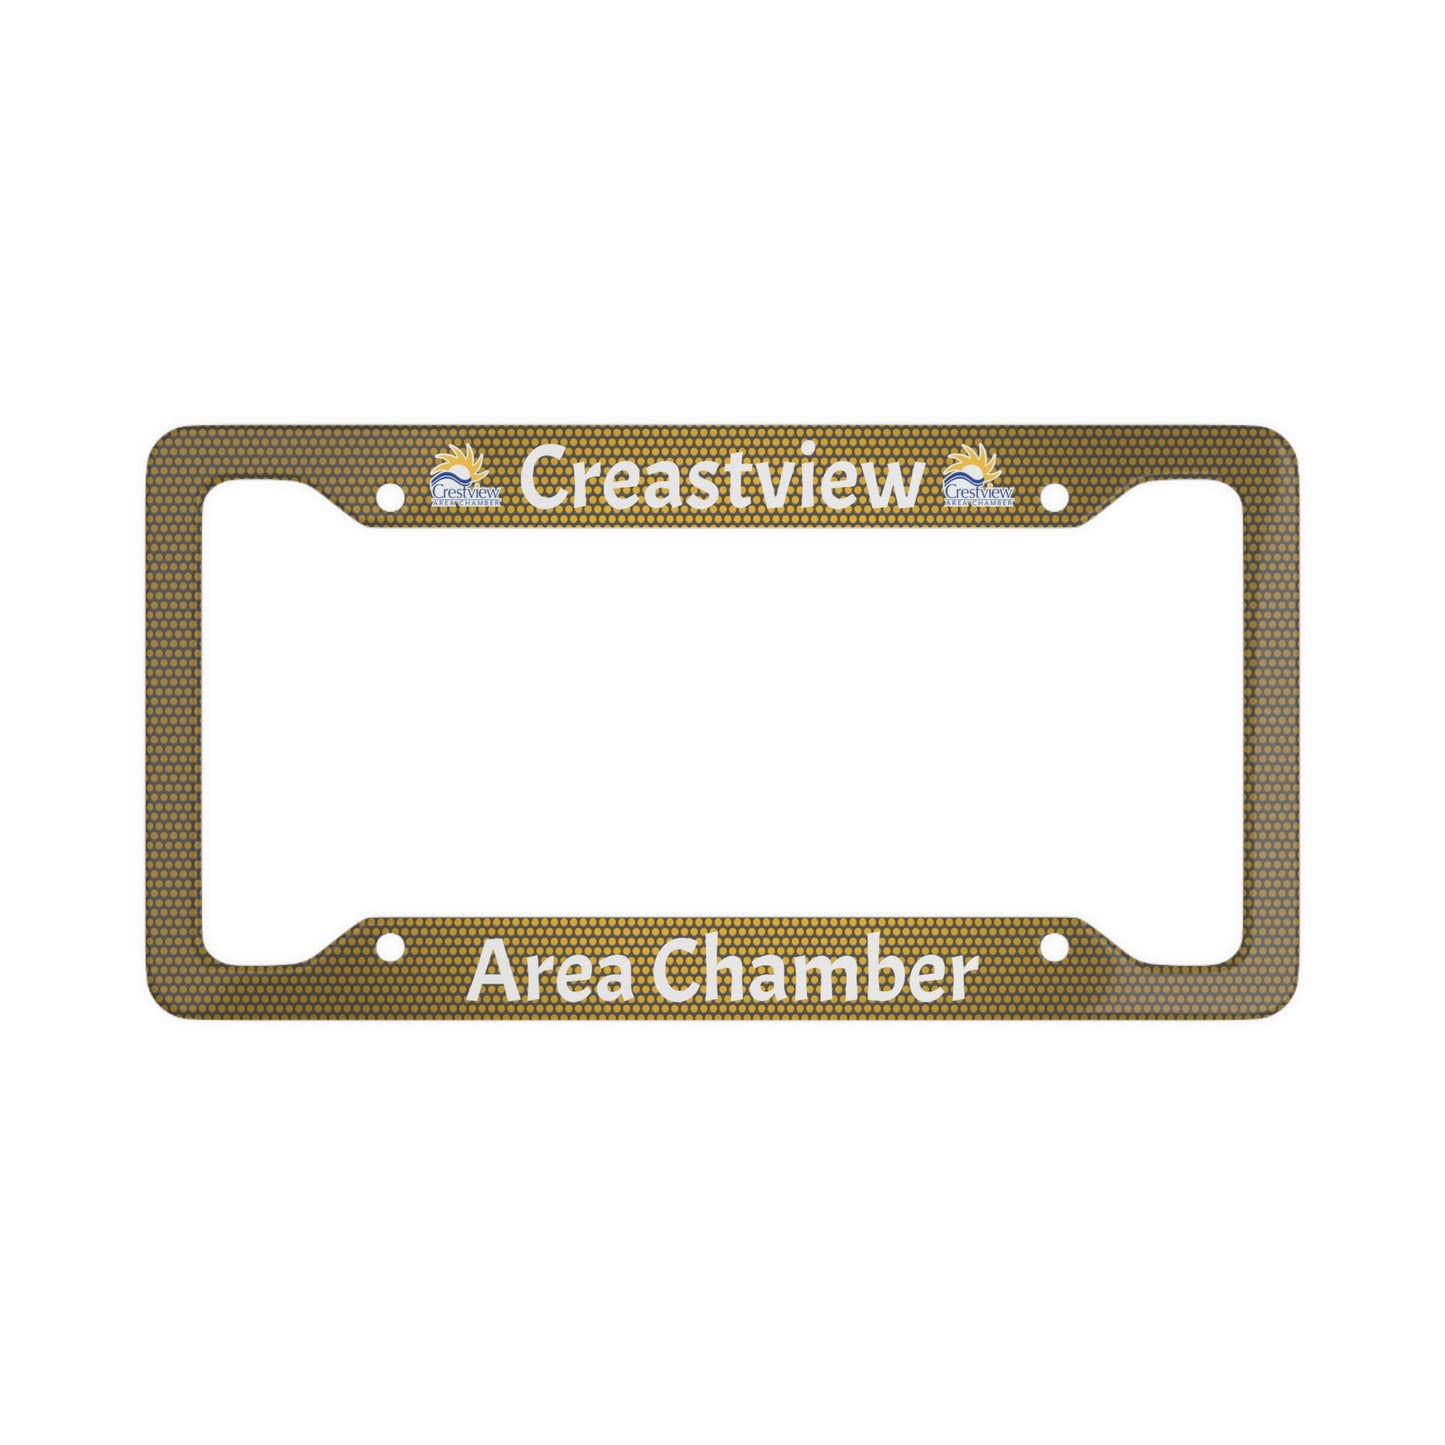 CCoC Yellow License Plate Frame